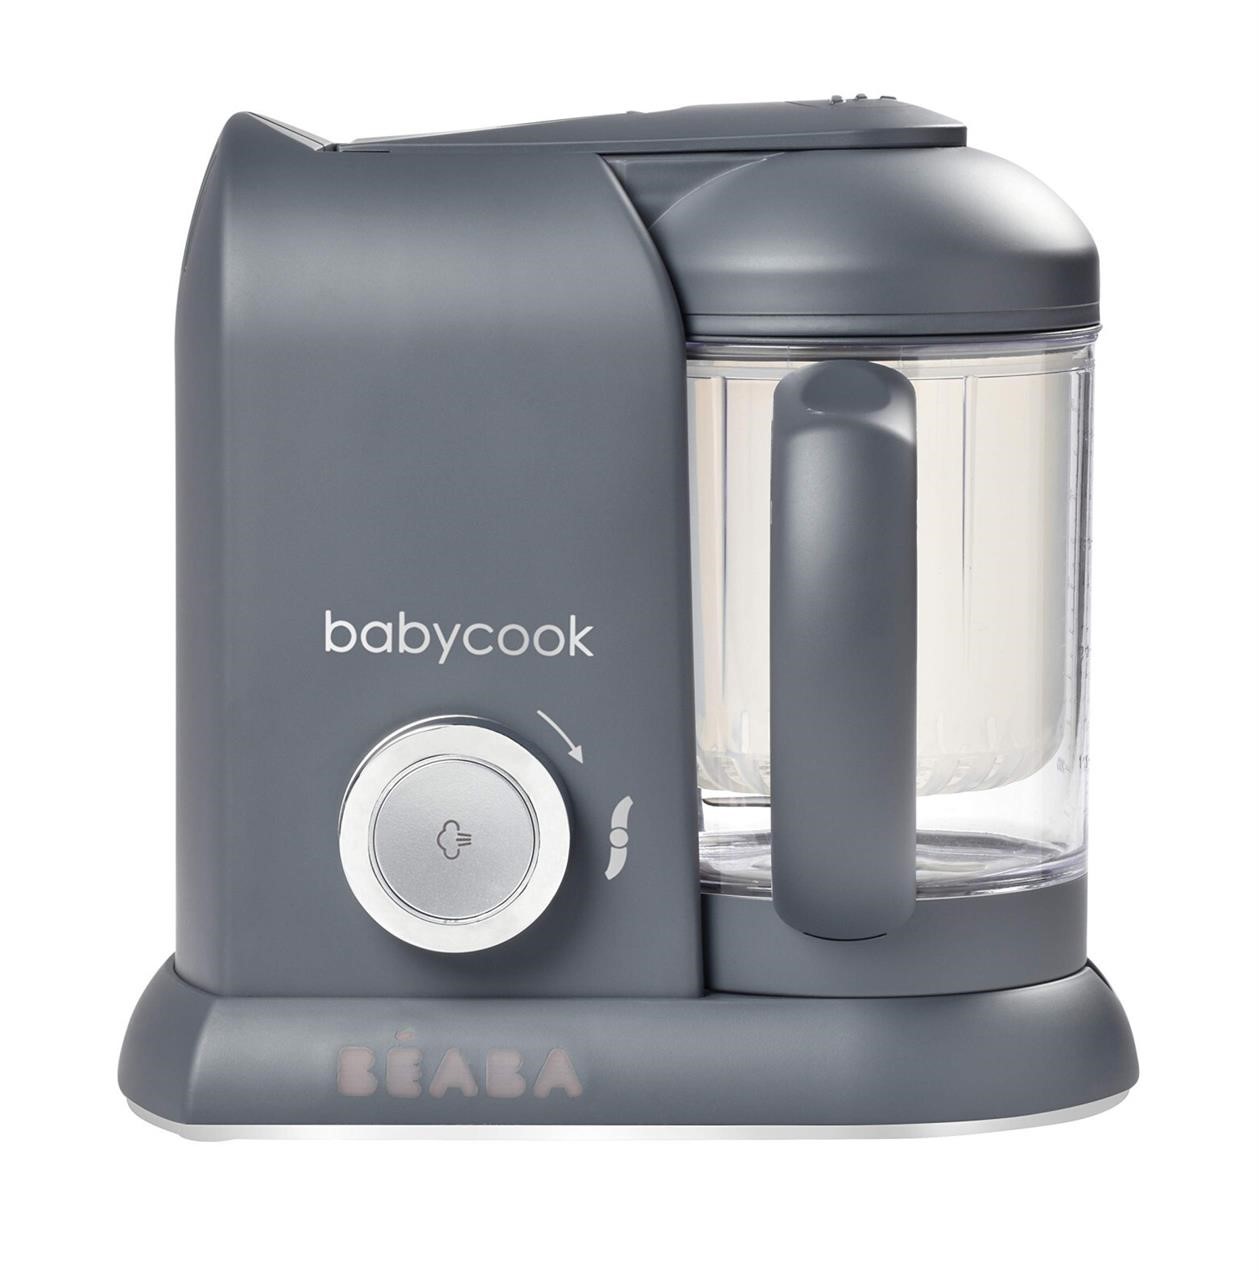 BEABA Babycook Solo 4 in 1 Baby Food Maker, Baby F